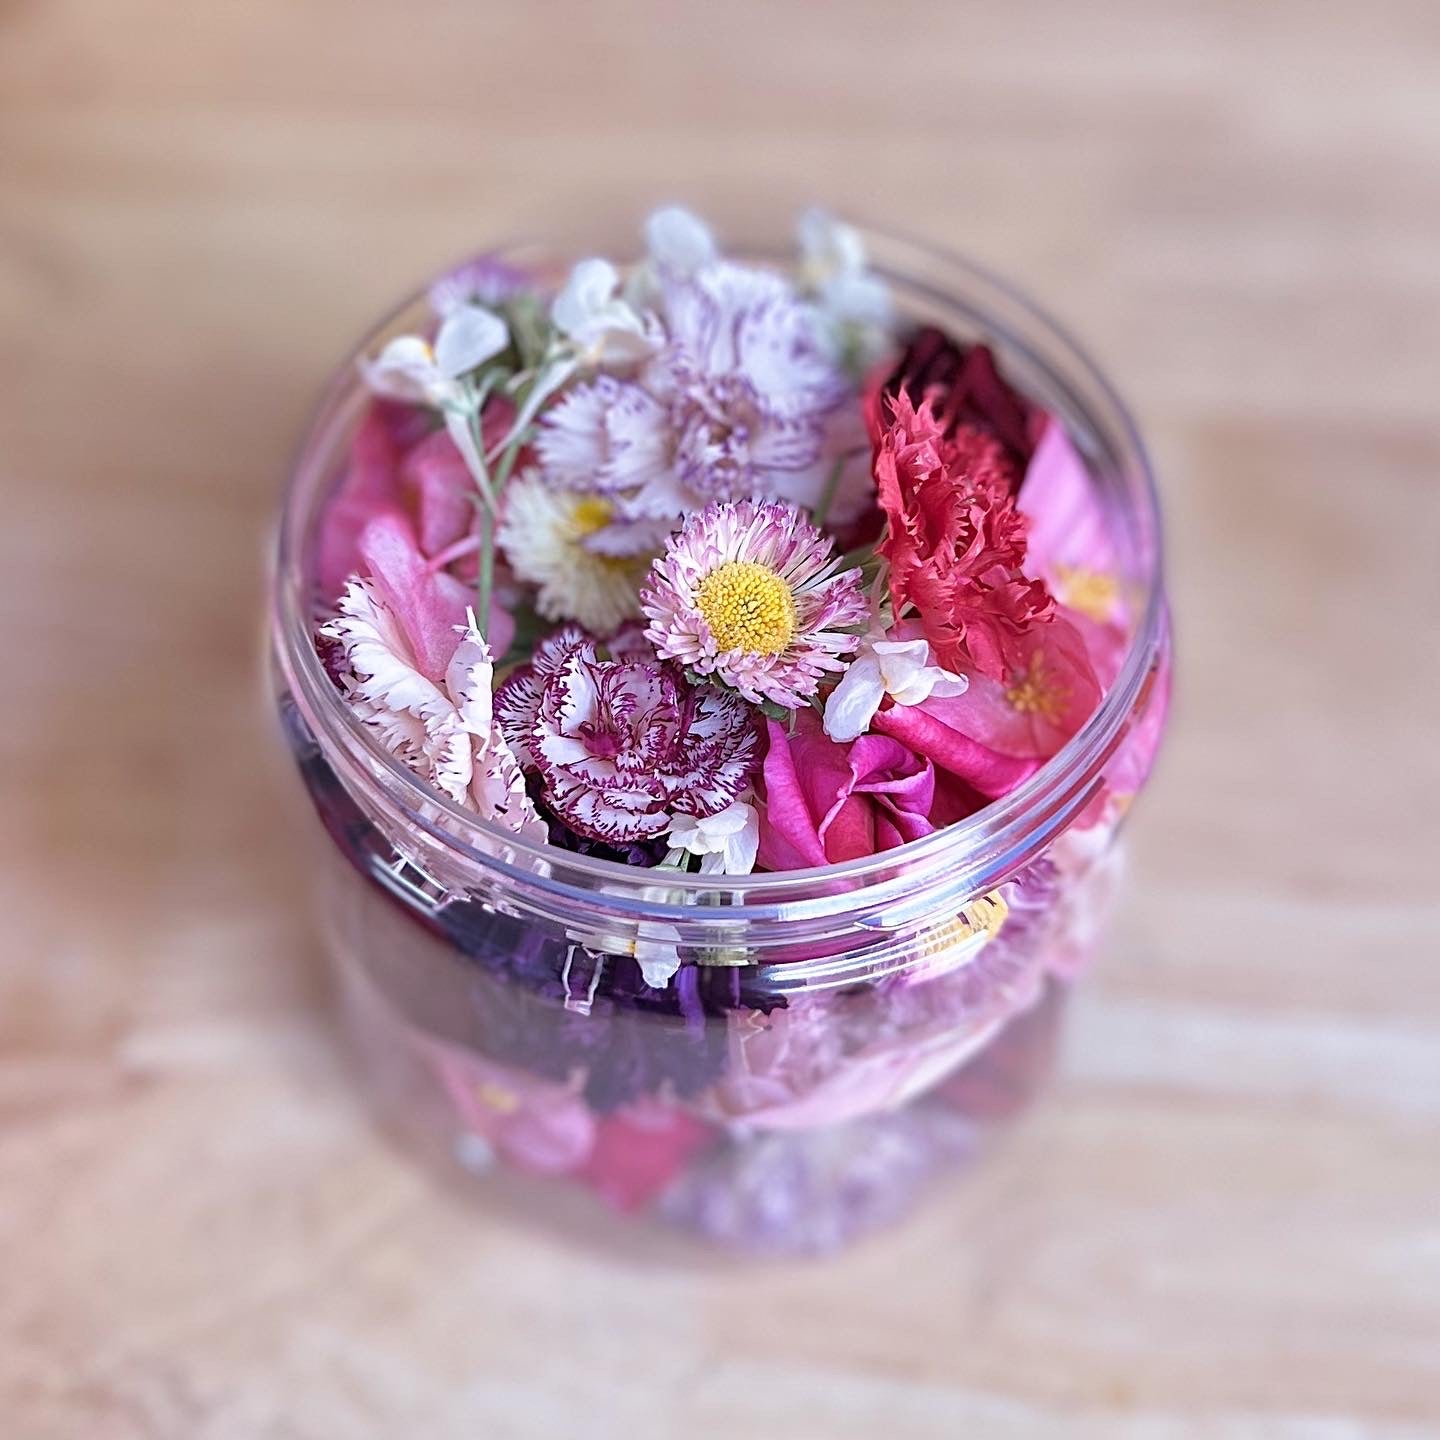 How to Preserve Edible Flowers - Sustainable Holly